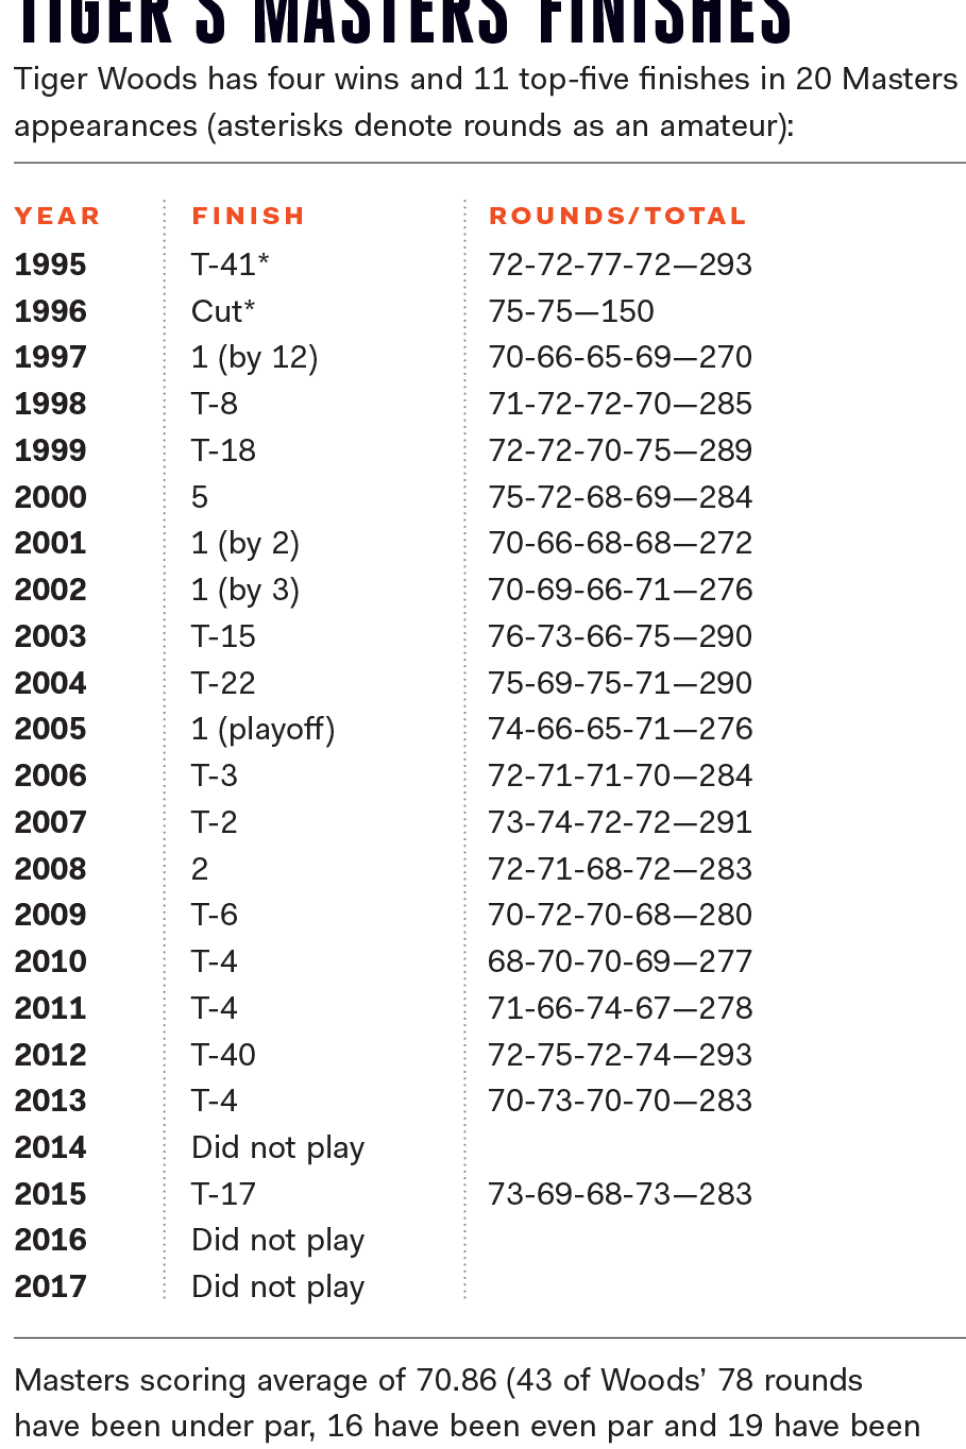 Tigers-Masters-finishes-chart-1995-2017.png